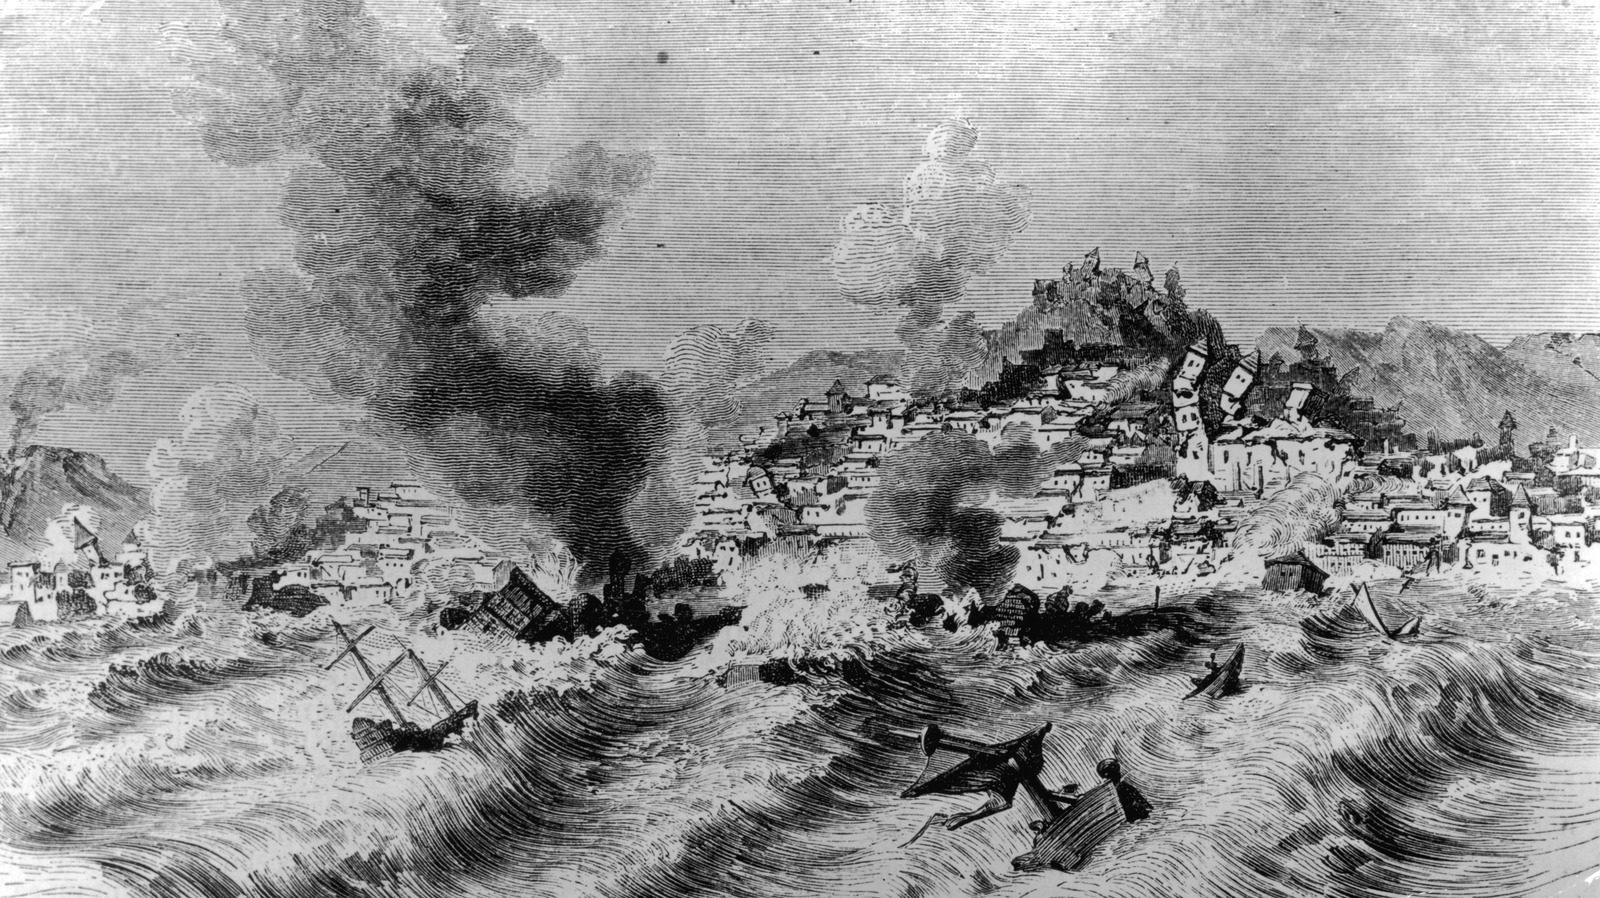 The Wild And Deadly True Story Of The 1755 Lisbon Earthquake